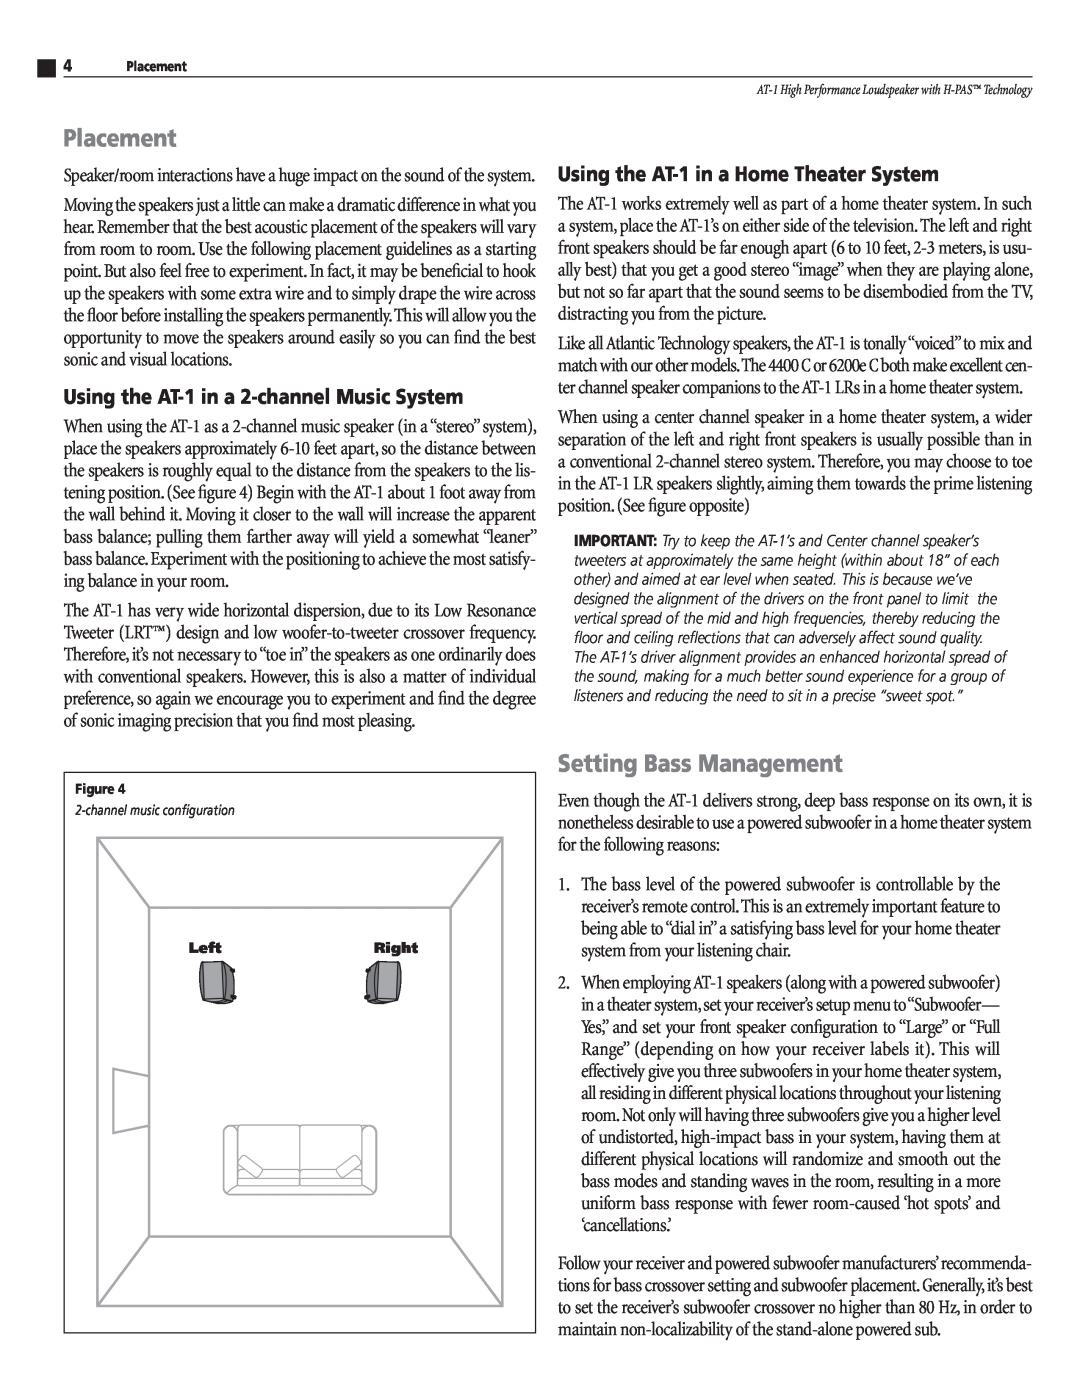 Atlantic Technology instruction manual Placement, Setting Bass Management, Using the AT-1in a 2-channelMusic System 